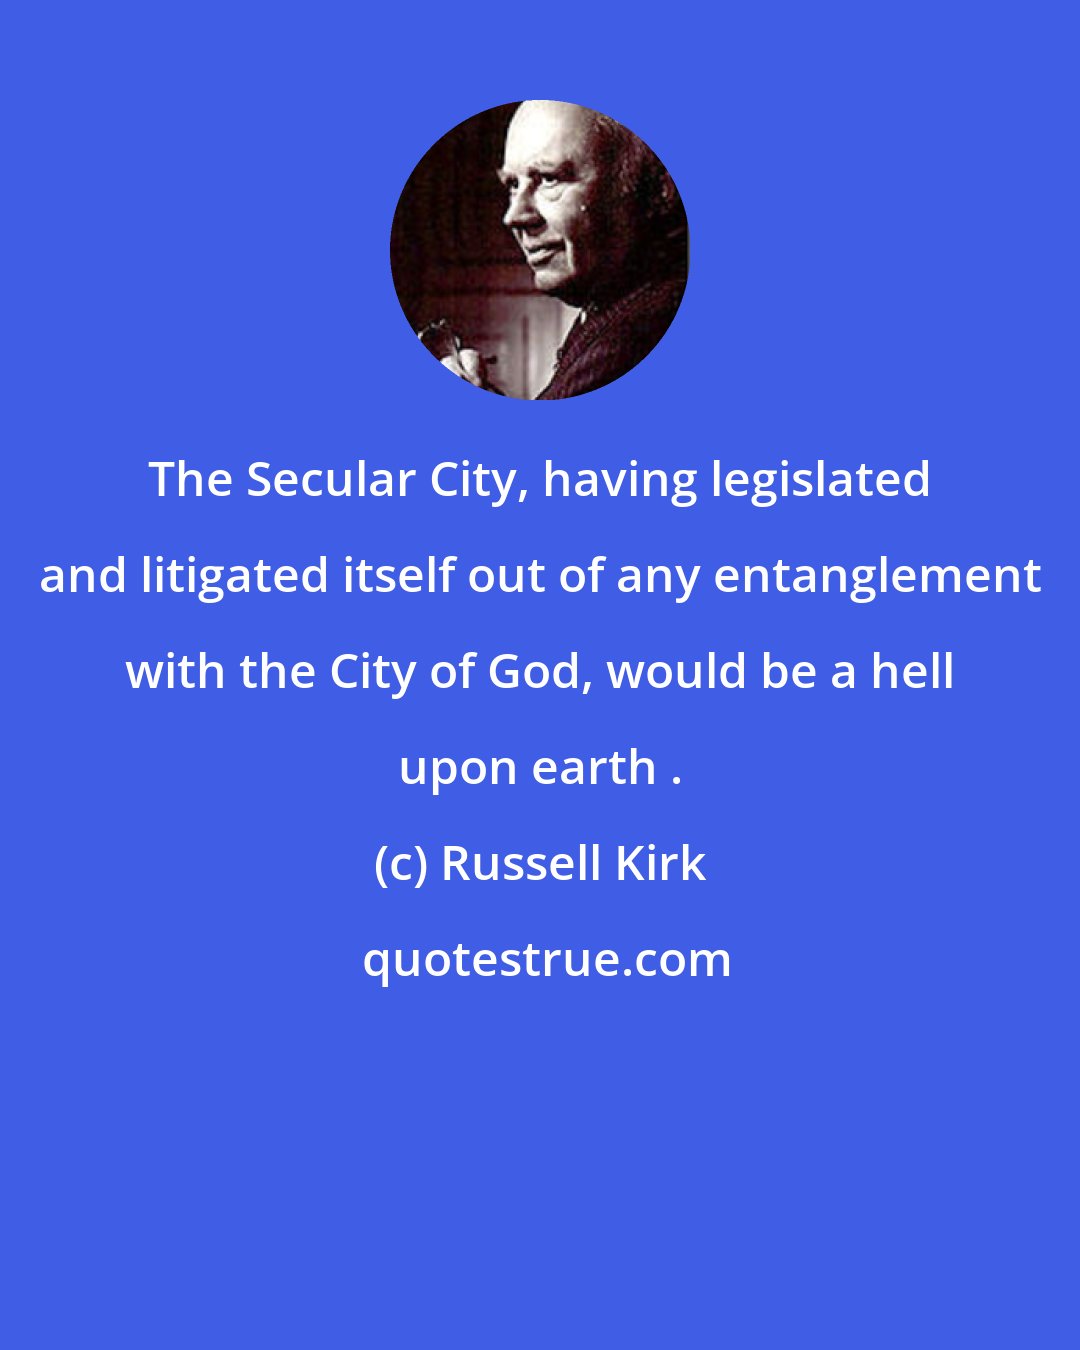 Russell Kirk: The Secular City, having legislated and litigated itself out of any entanglement with the City of God, would be a hell upon earth .